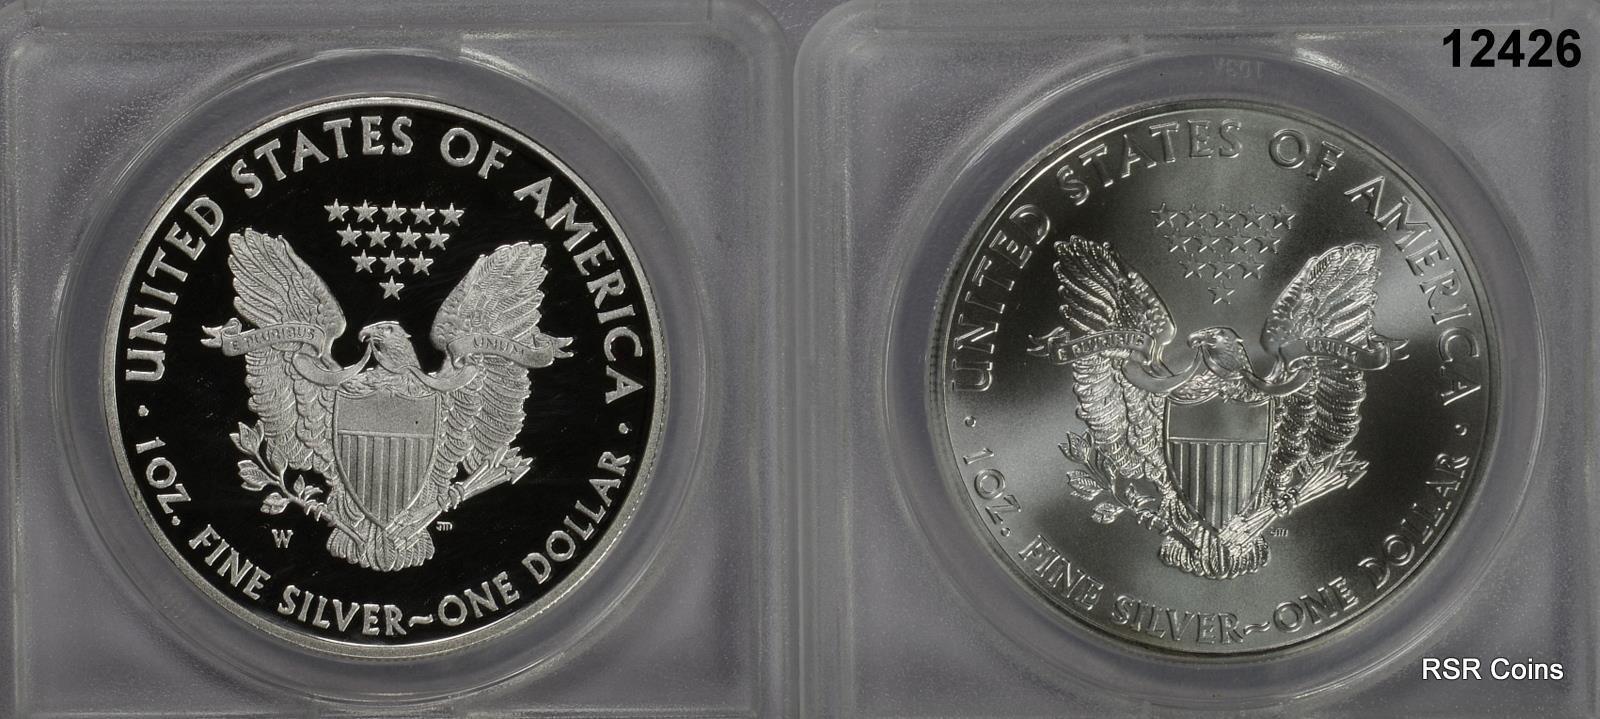 2015 W & P 2 COIN SILVER EAGLE SET ANACS CERTIFIED PR70 & MS70 PERFECT! #12426